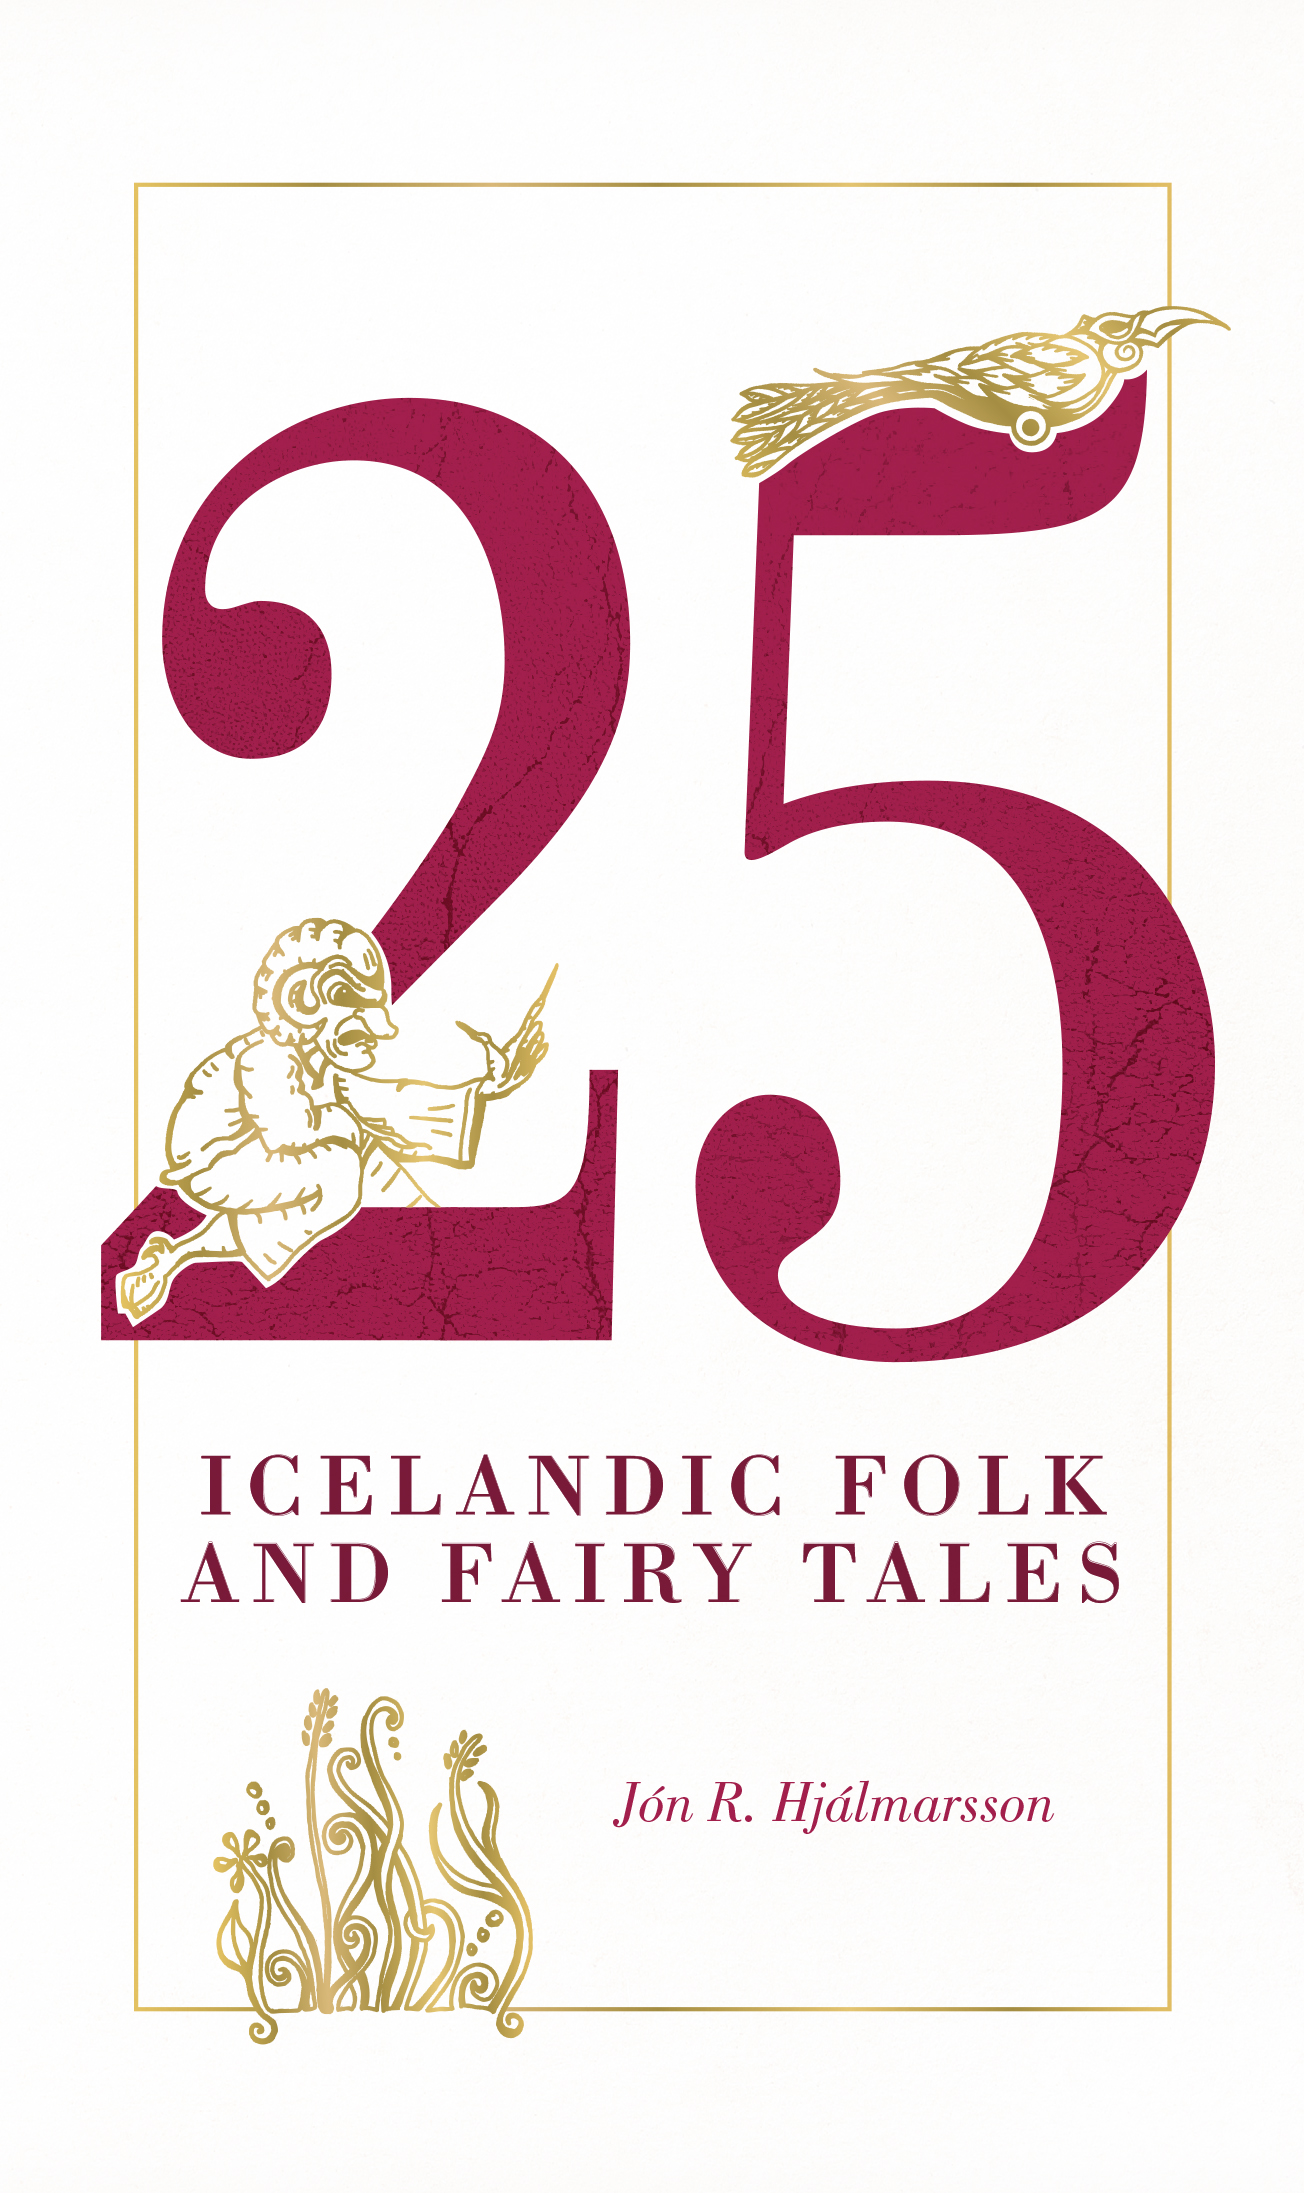 A Traveller’s Guide to Icelandic Folk Tales (2011)